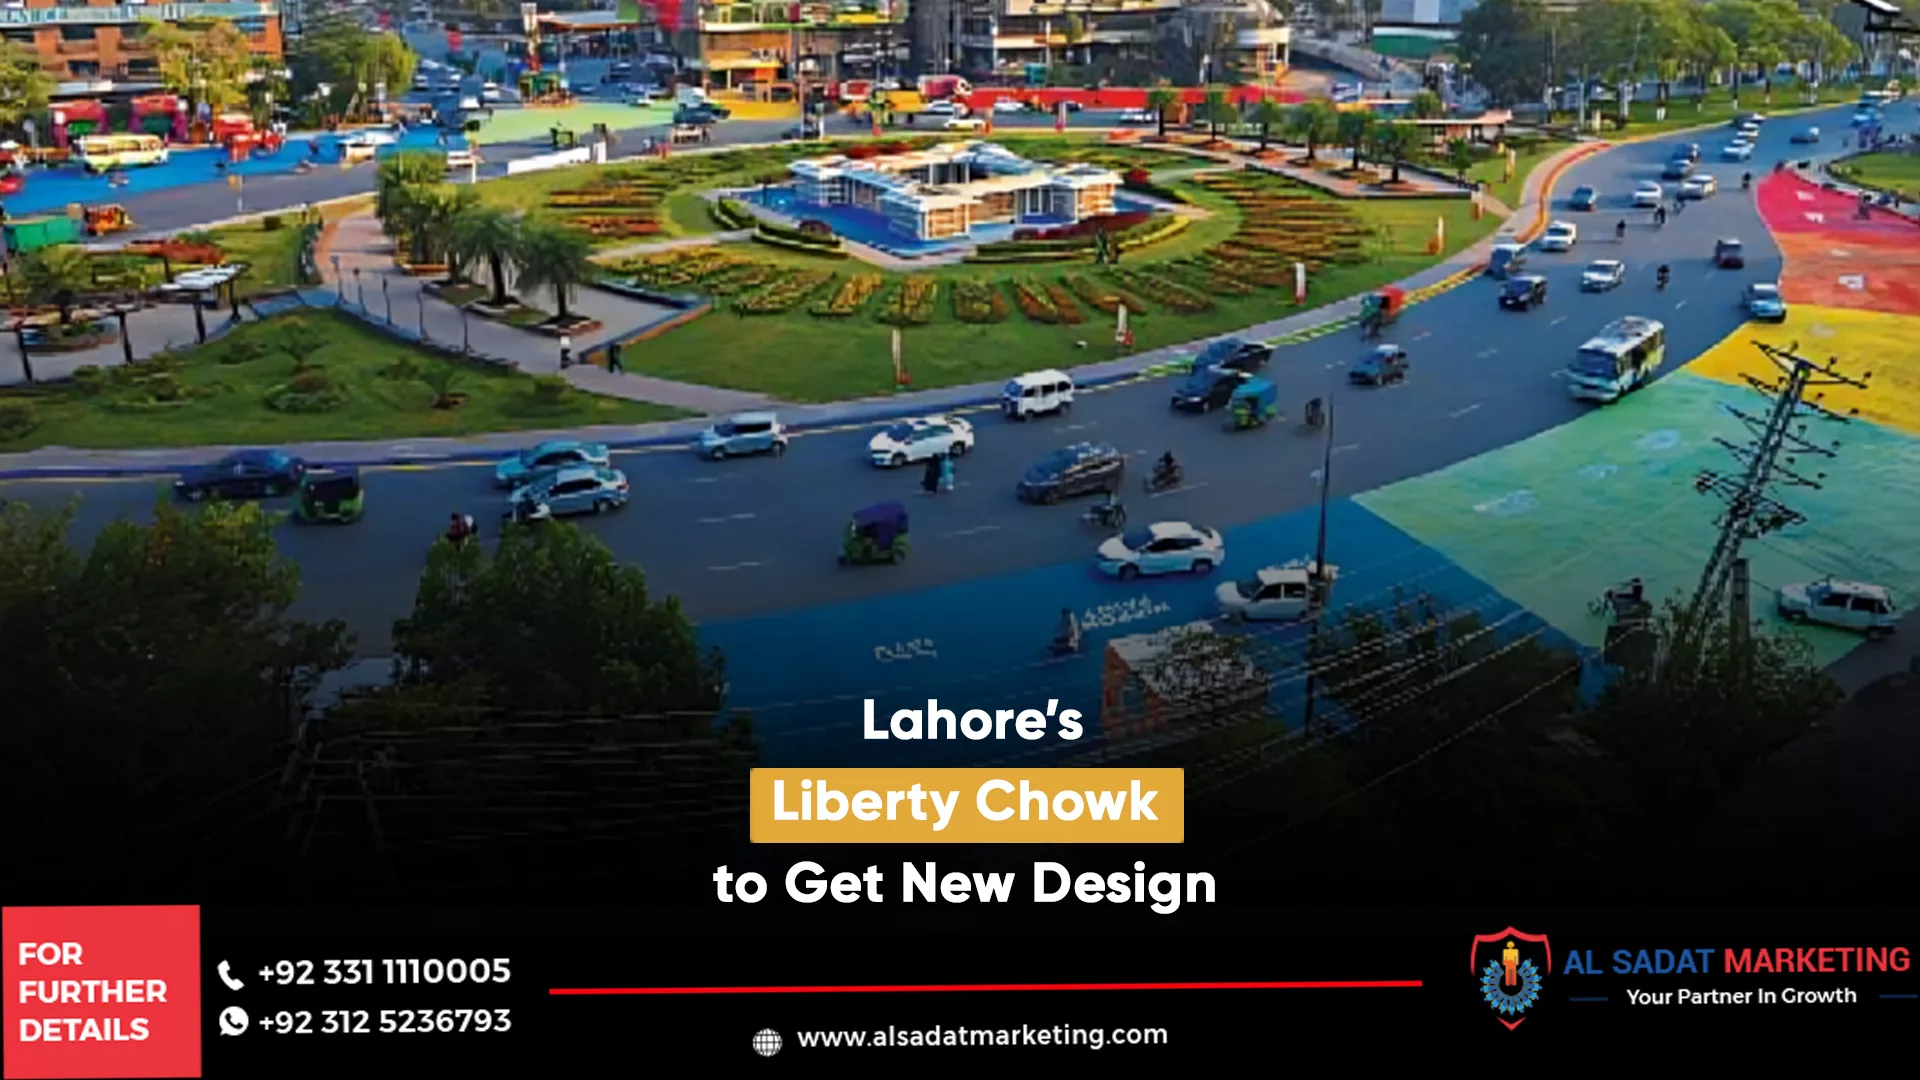 mant cars and building in the center of ground in lahore liberty chowk